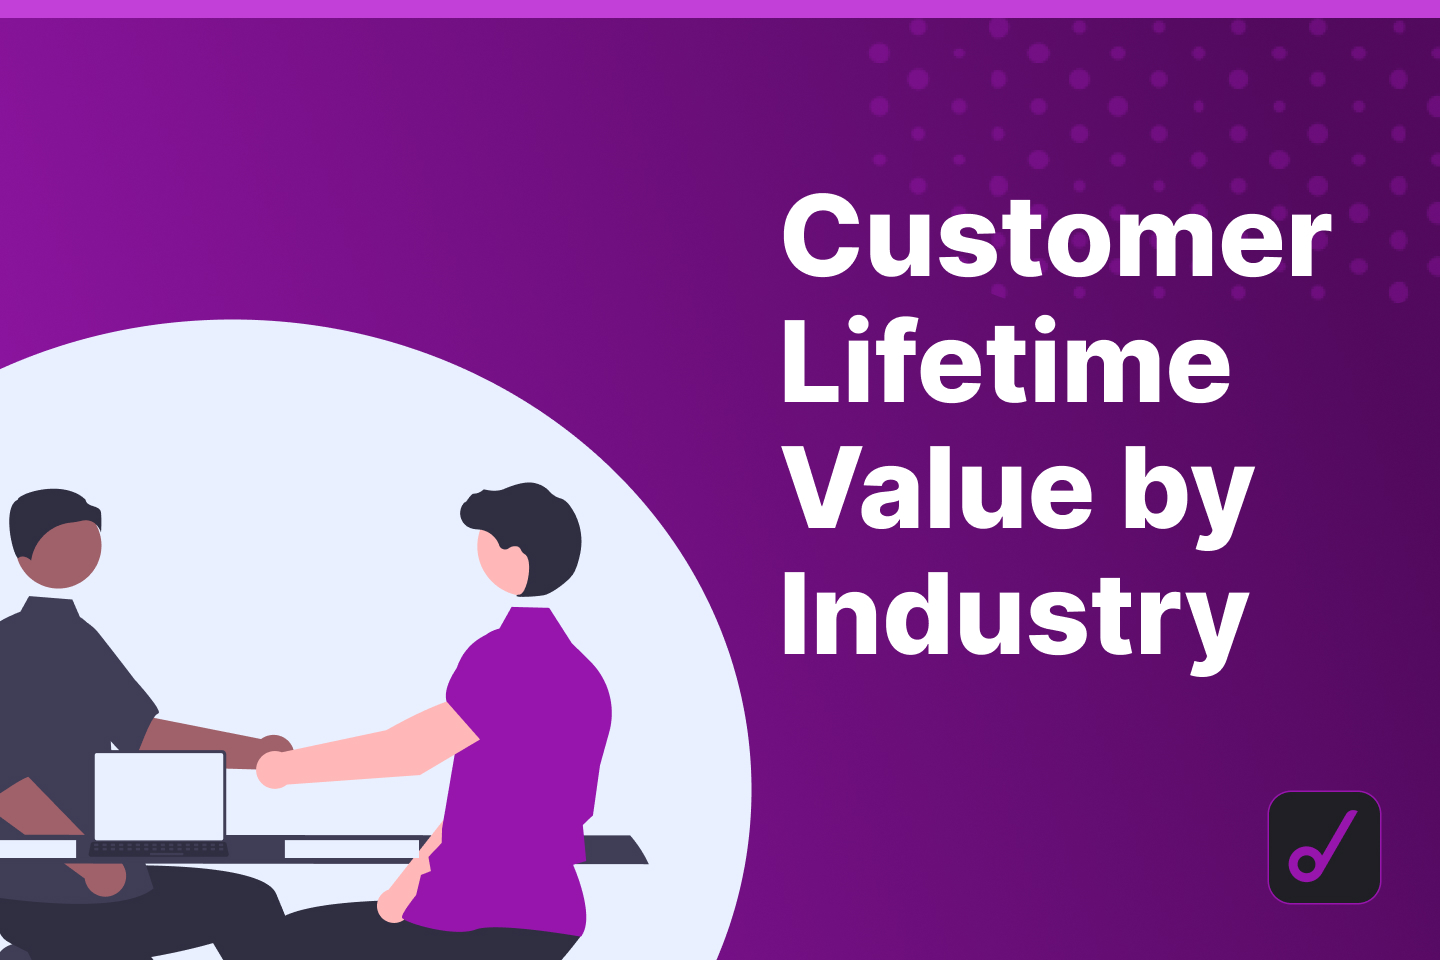 Average Customer Lifetime Value by Industry (ACLV)